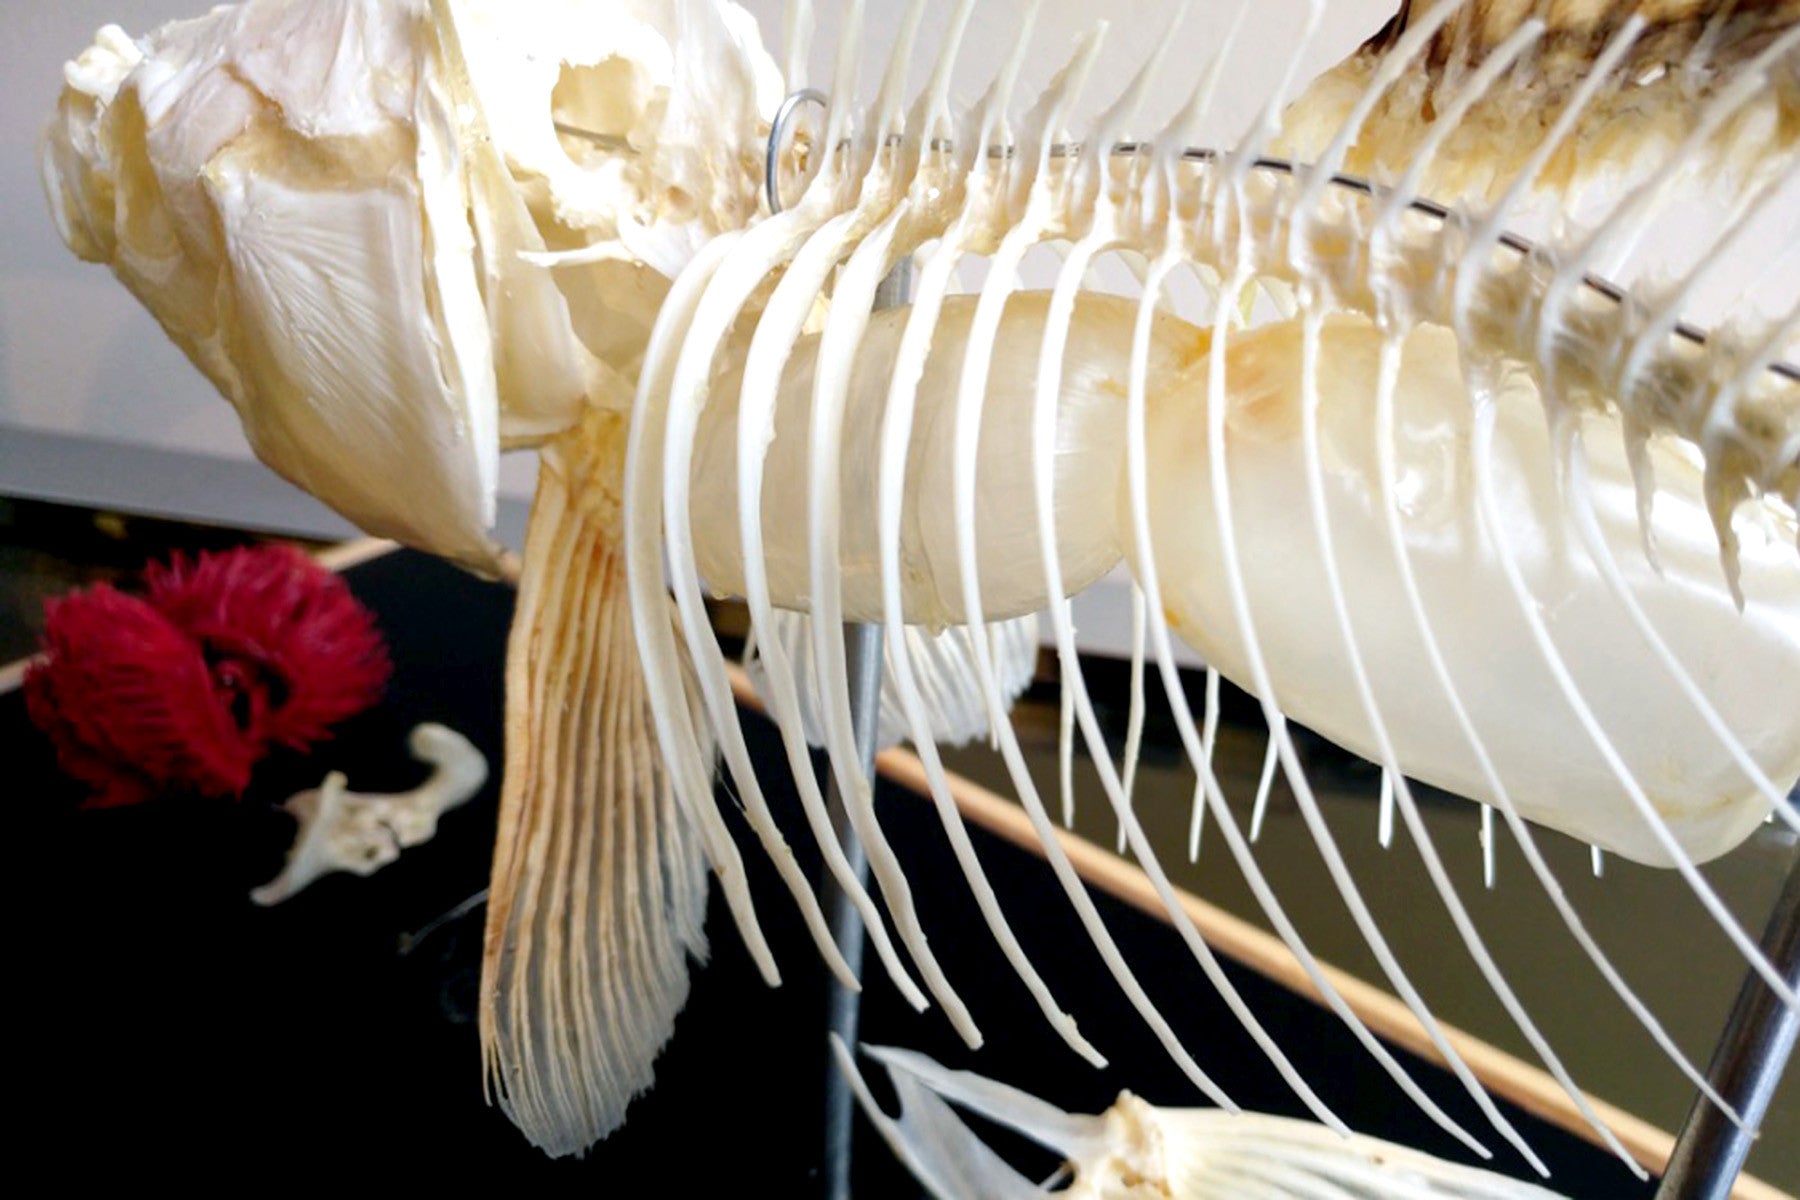 X Mounted Trout Skeleton with Preserved Gills